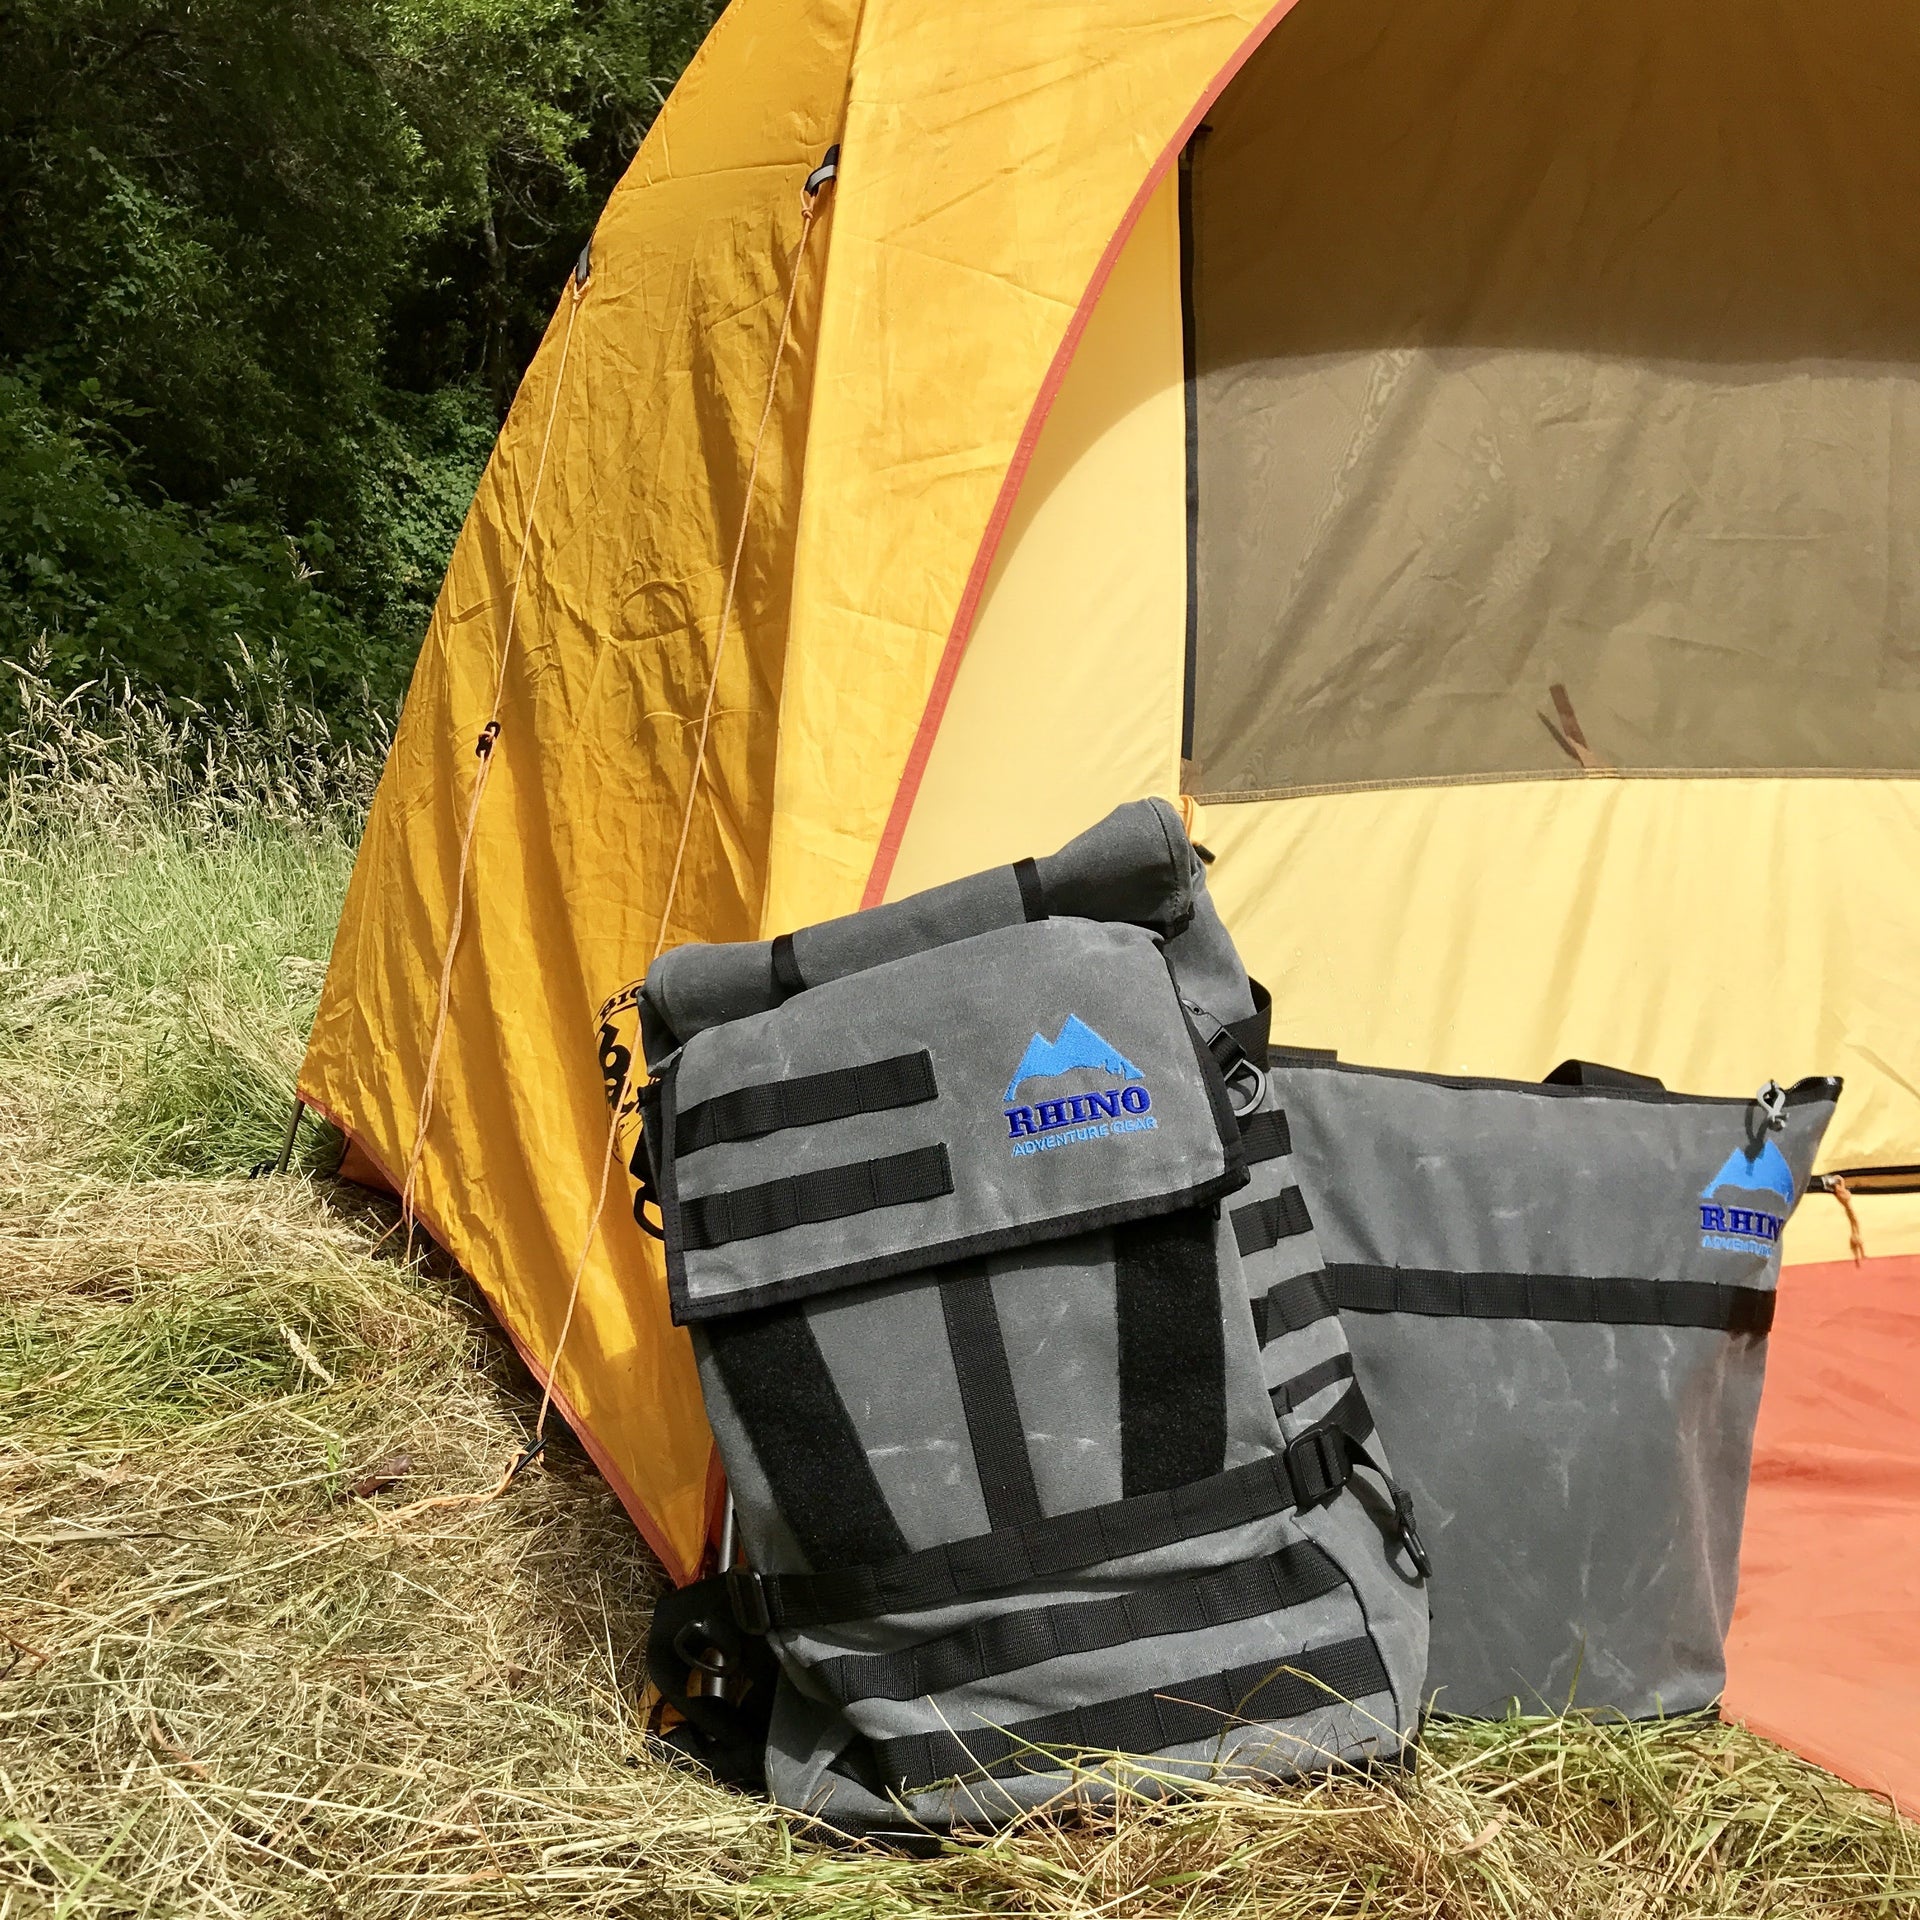 Adventure Tote Bag and Adventure Backpack, both grey with black trim and blue Rhino Adventure Gear logo shown leaning against yellow and orange tent